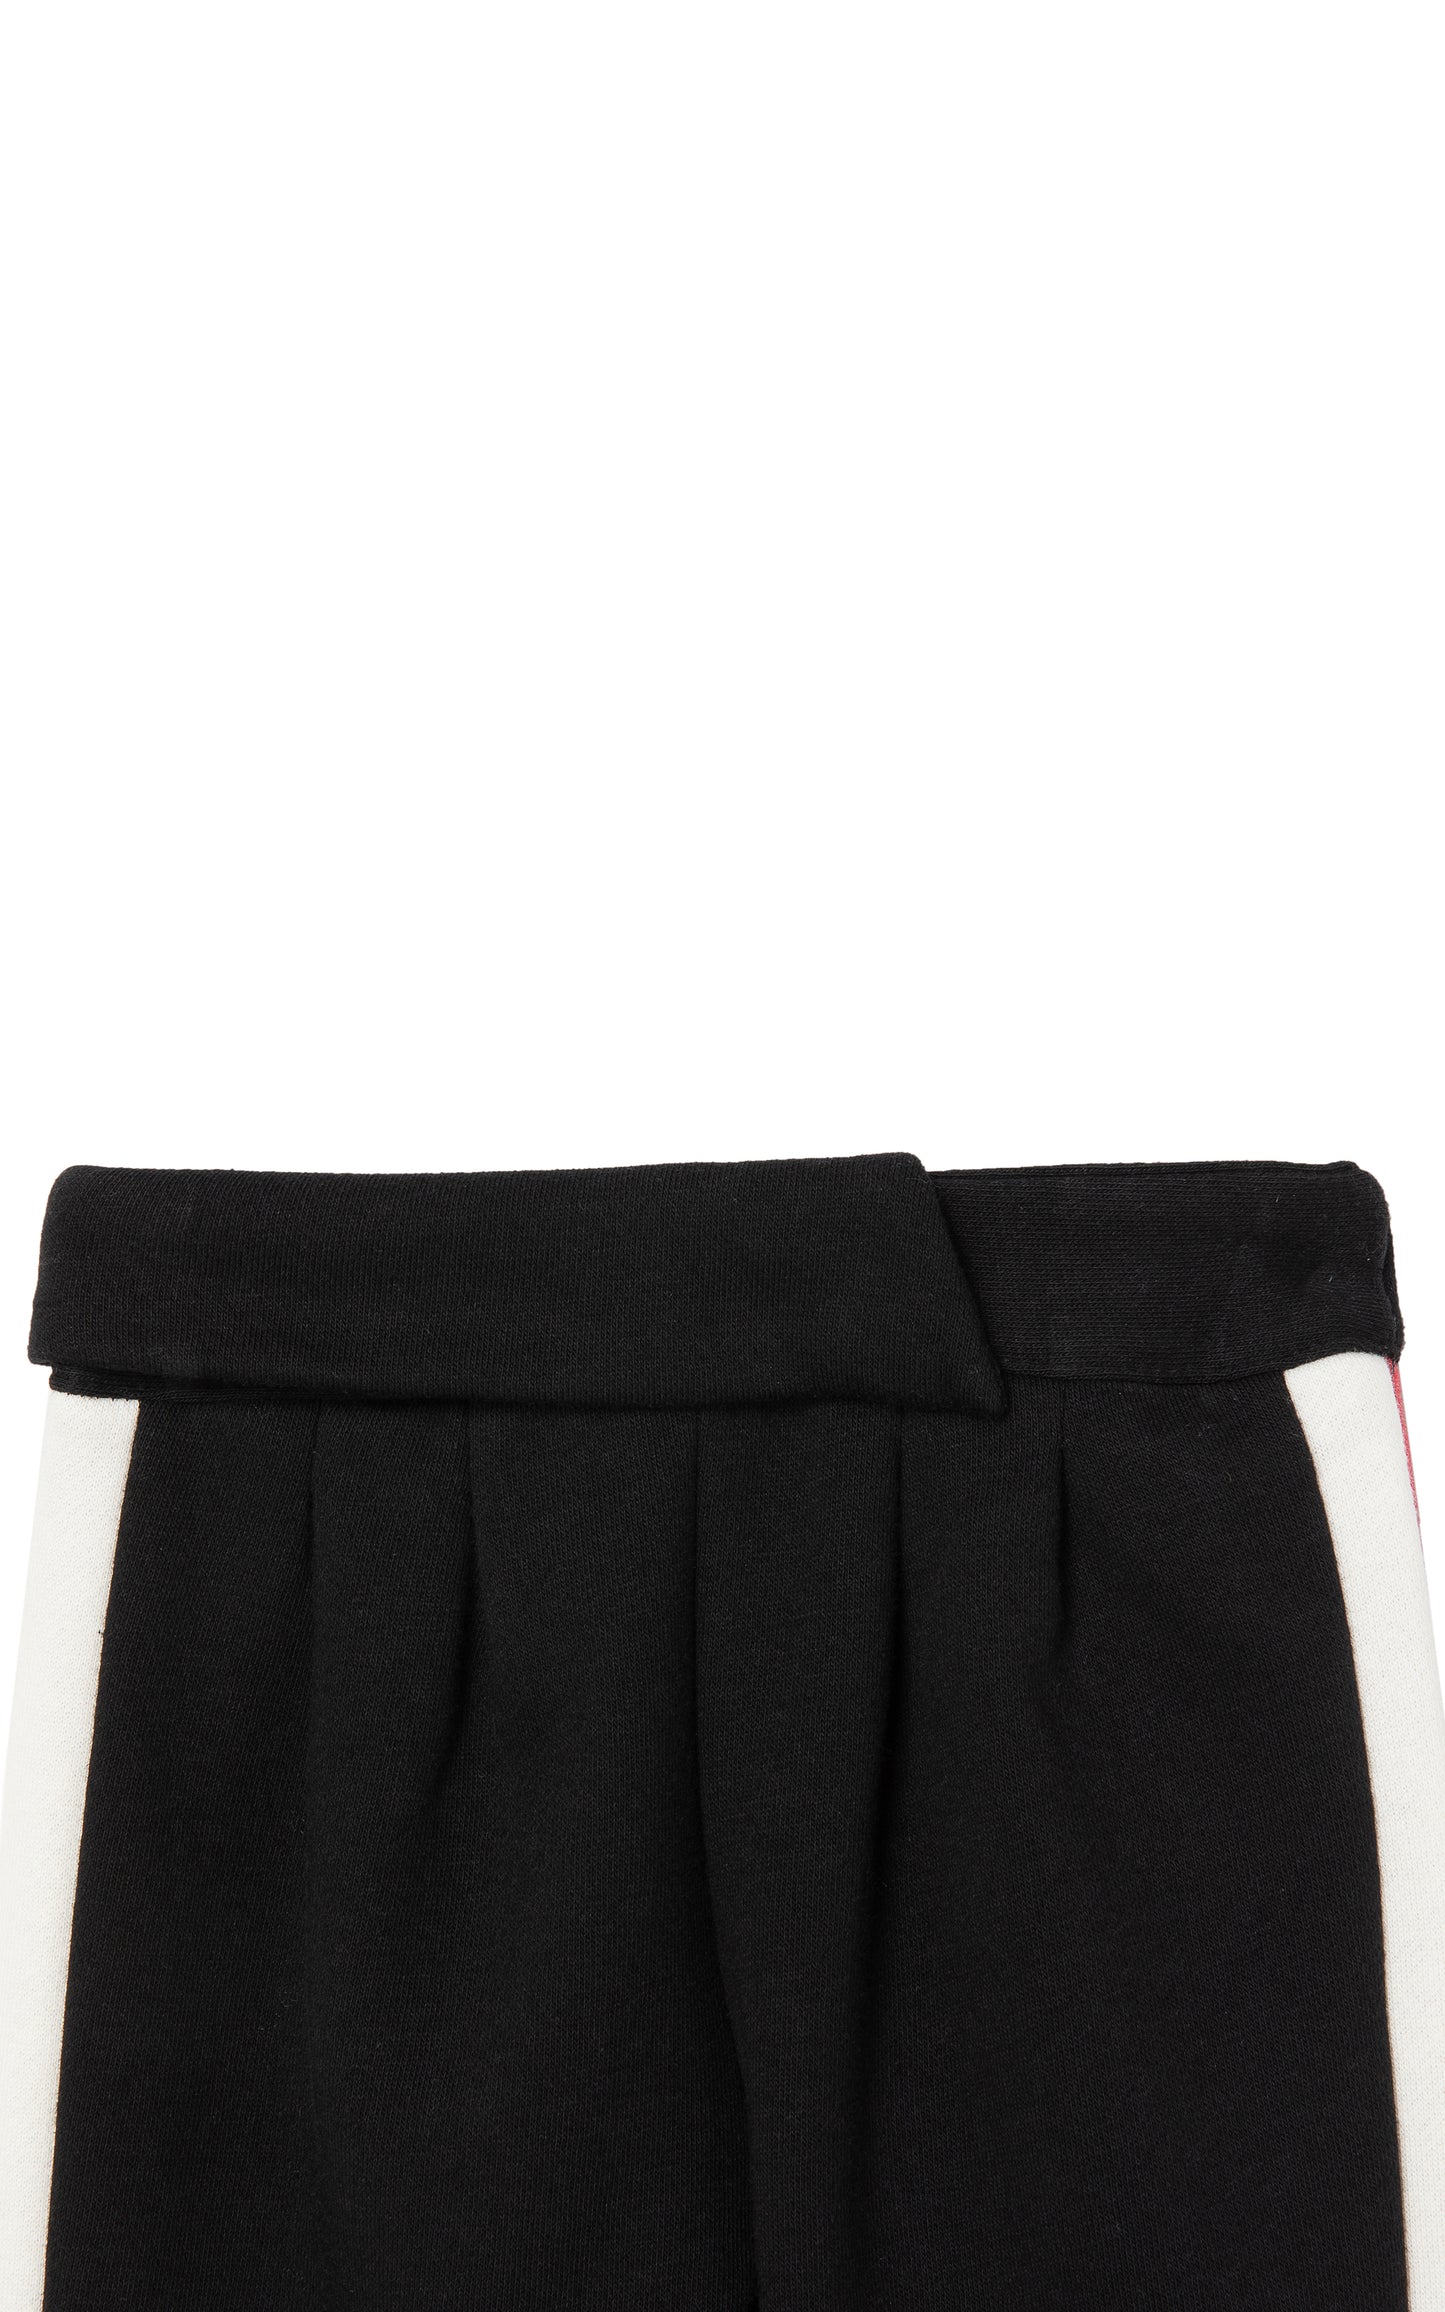 Front view of black hoodie pant with side stripe detail 